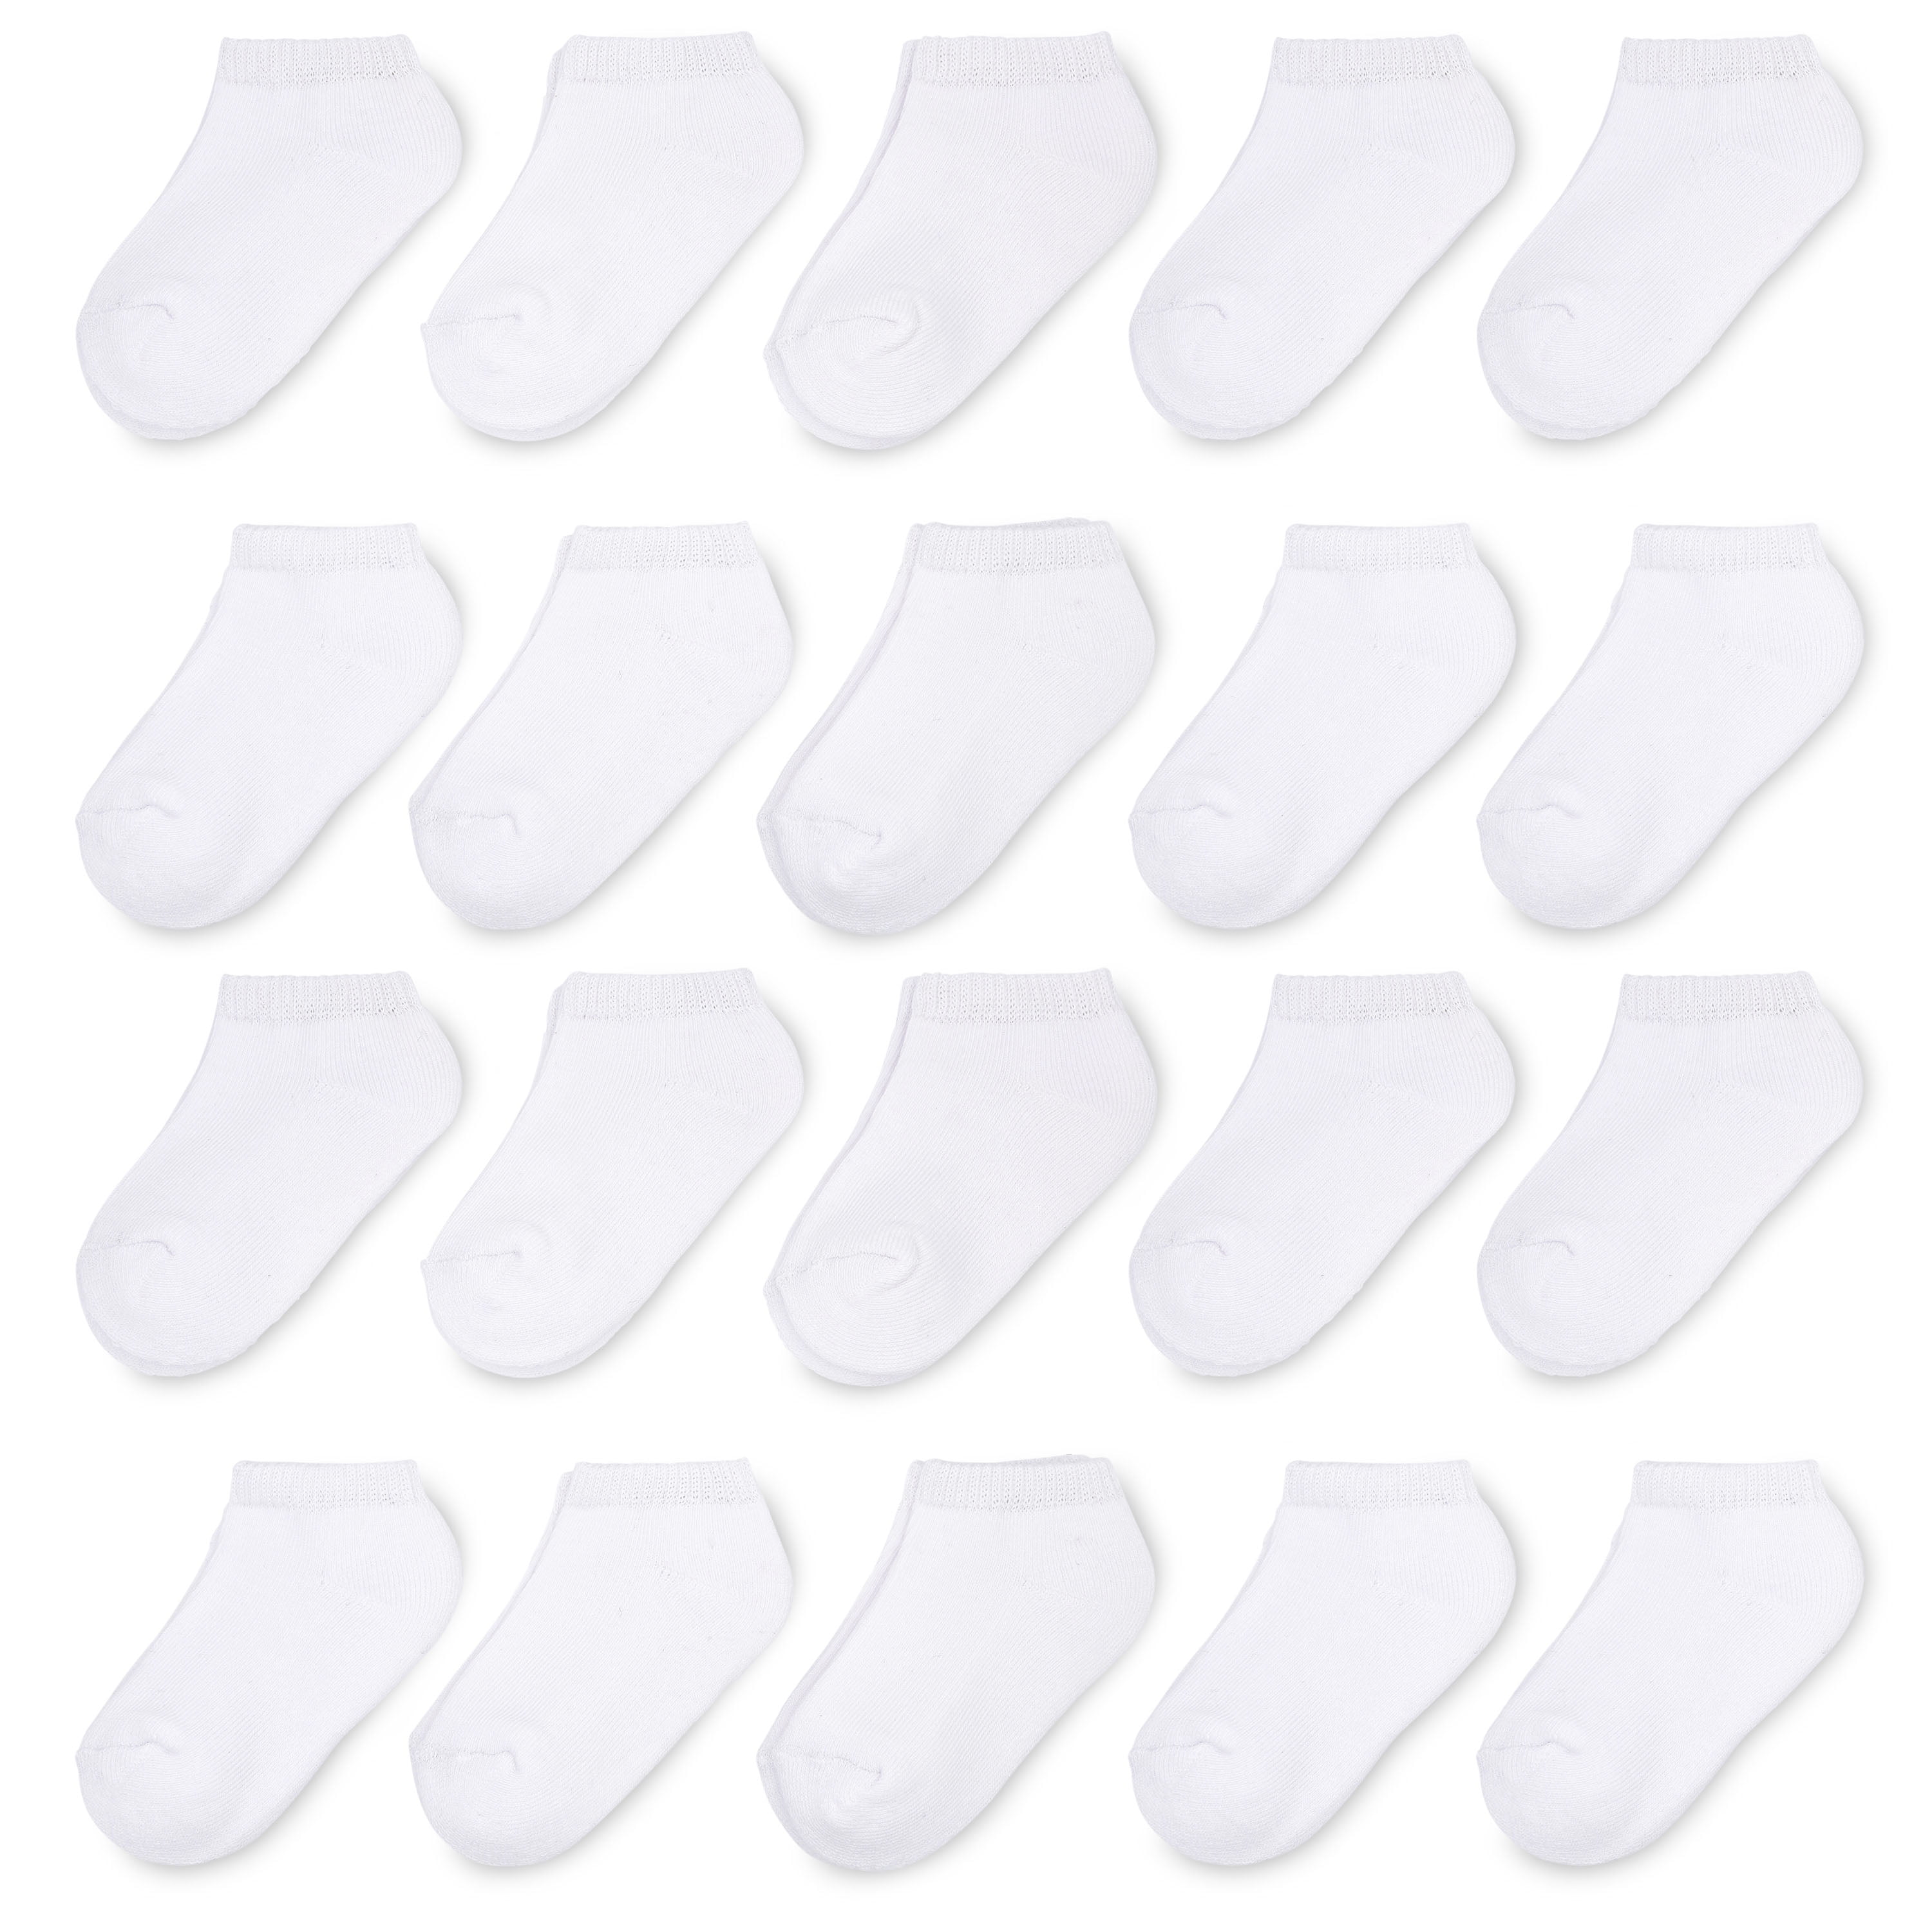 Wonder Nation Infant and Toddler Low- Cut Socks, 20-Pack, Sizes 0M-5T ...